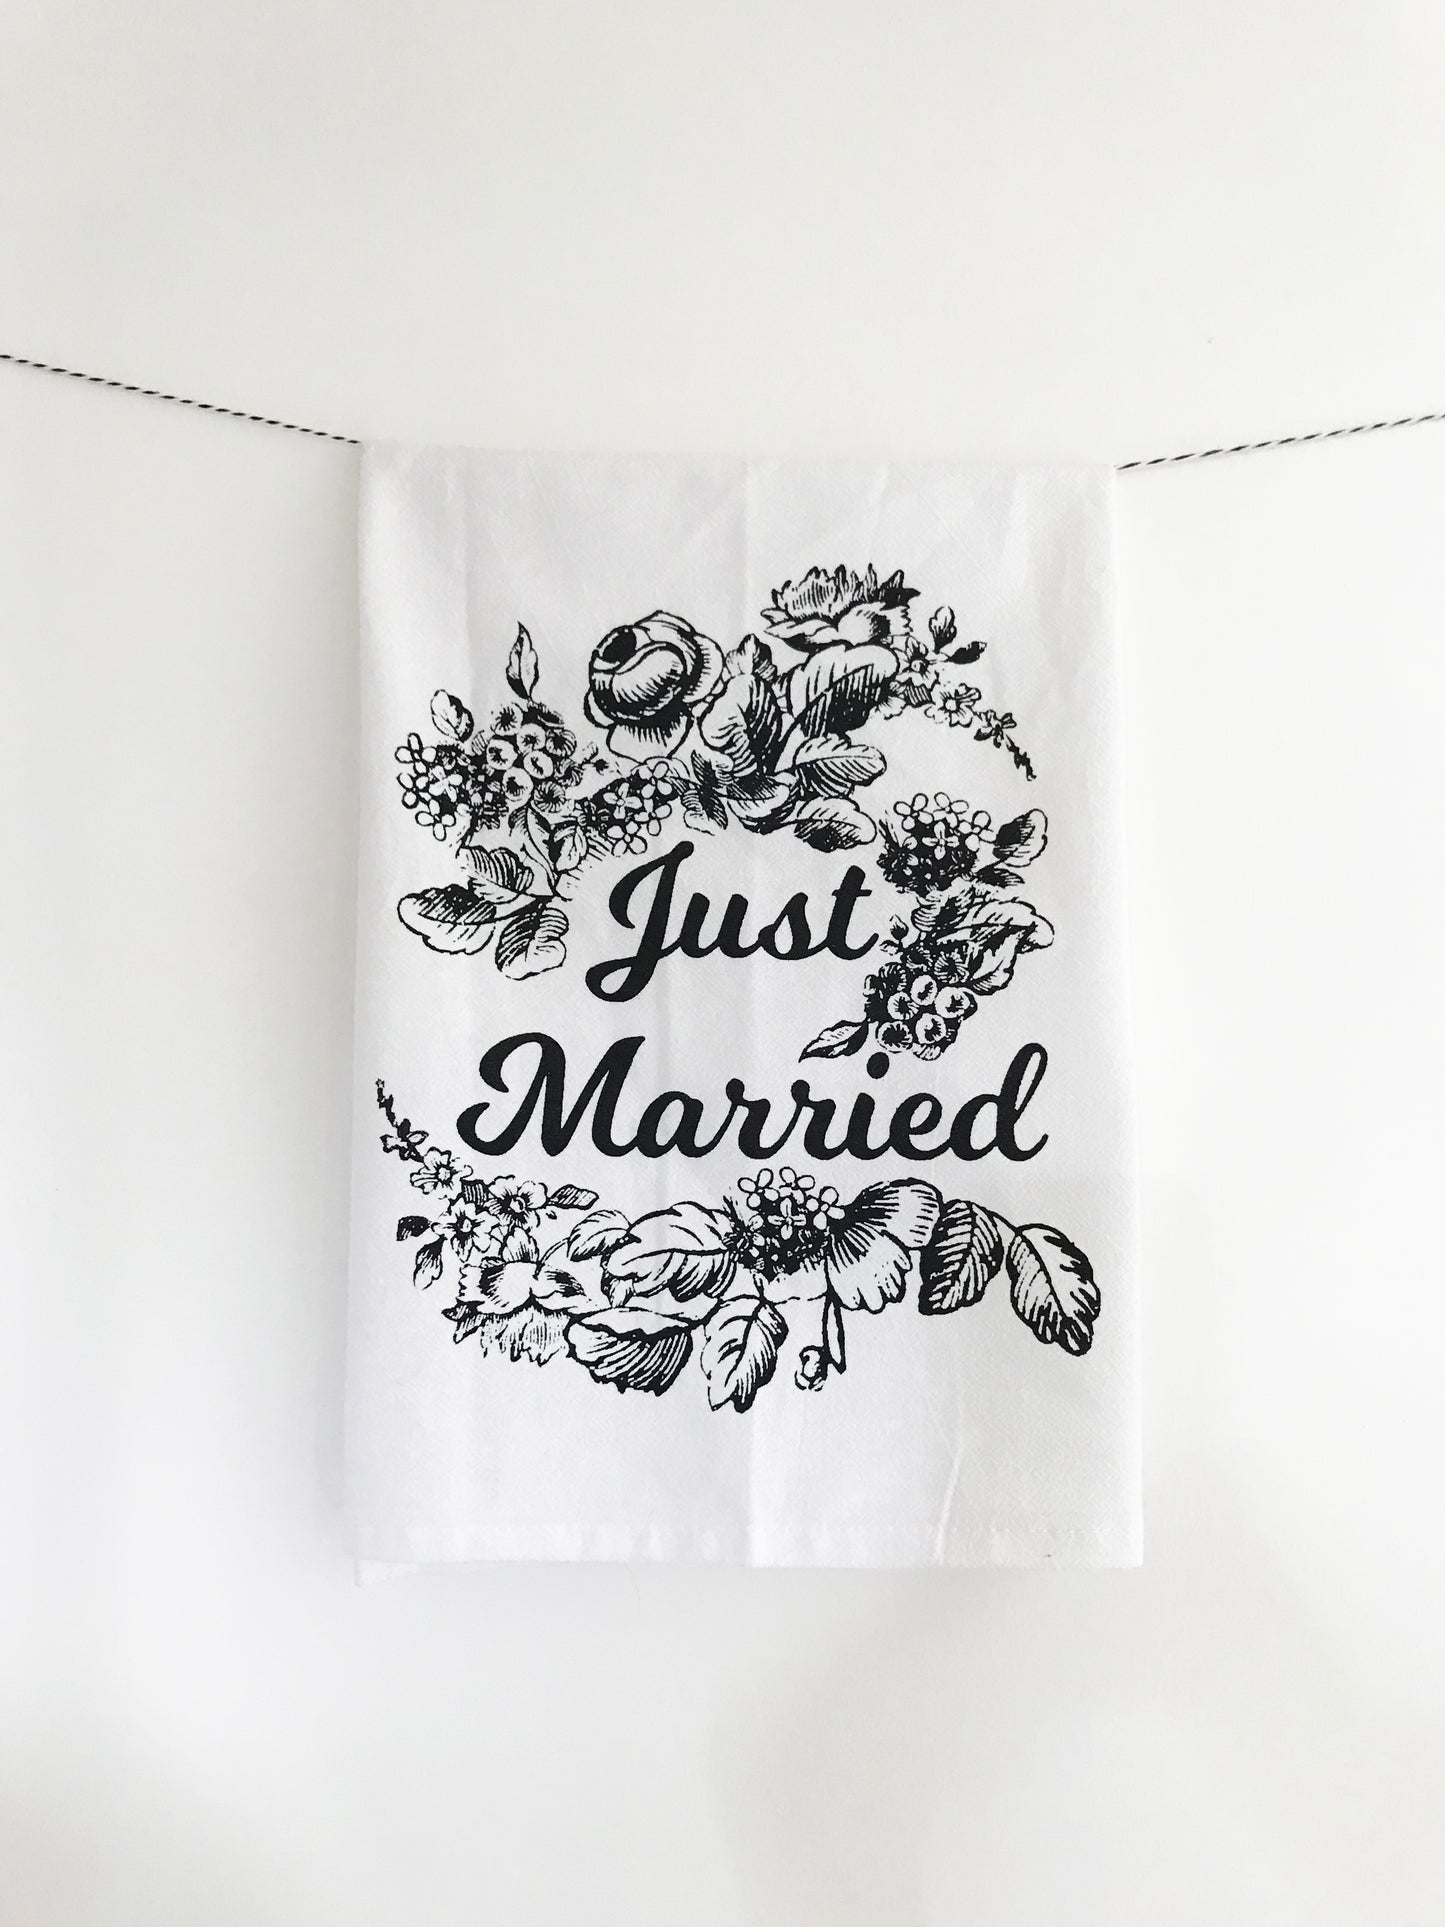 screen printed tea towel just married hand illustrated floral design black and white flowers on cotton kitchen towel coin laundry fun home decor 